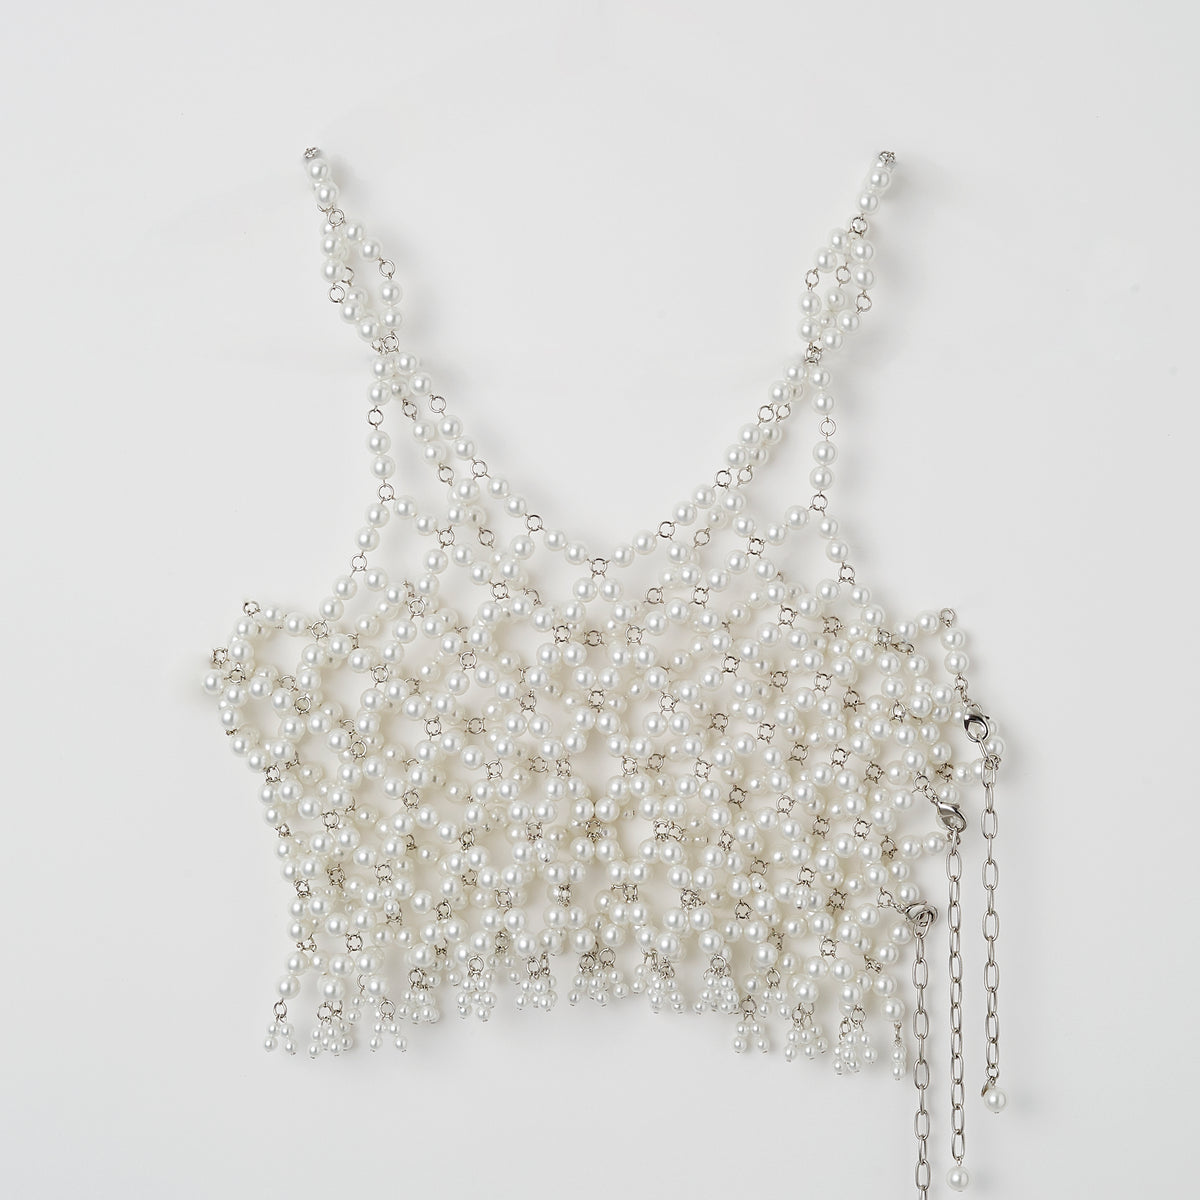 Snow cover pearl bustier (White)